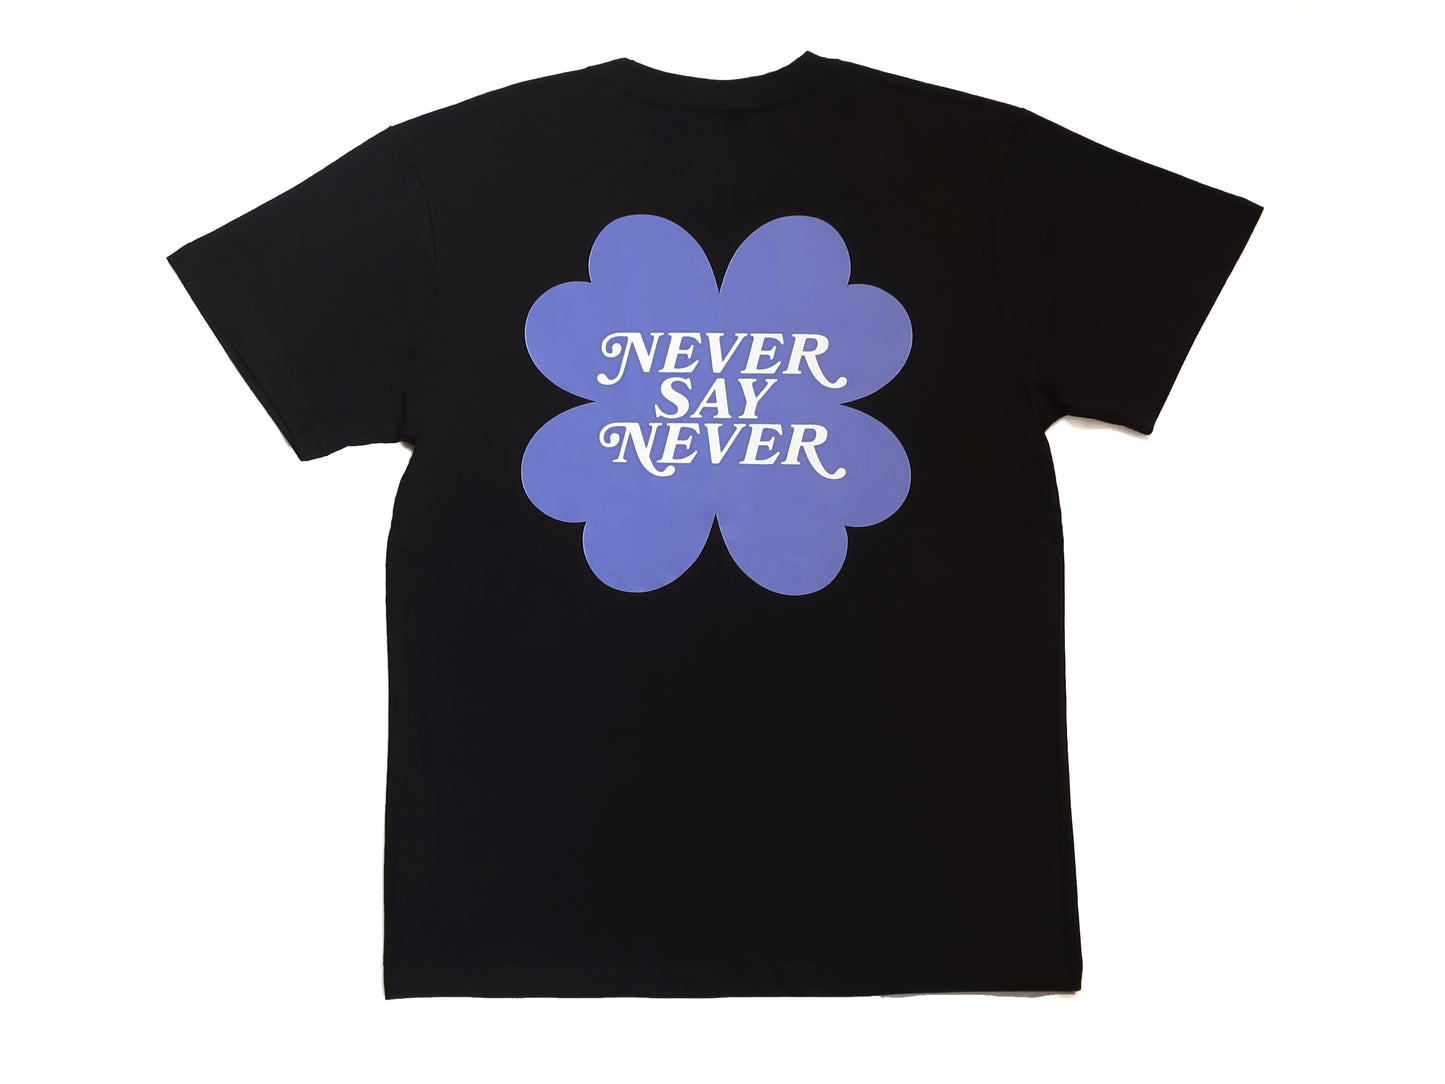 NEVER SAY NEVER T SHIRT